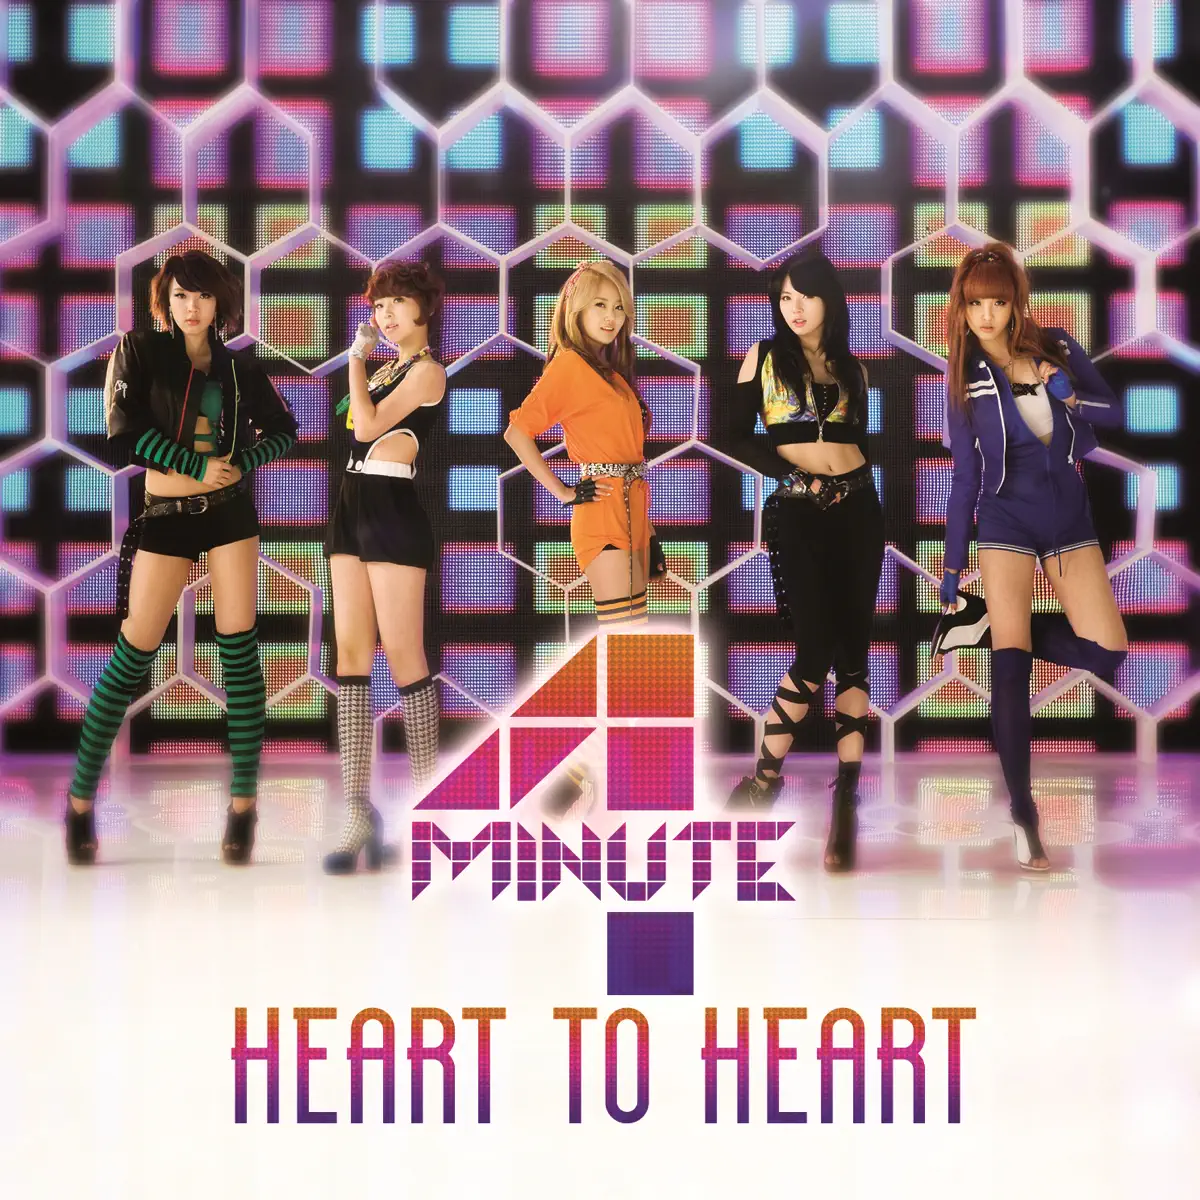 4Minute - Heart to Heart - EP (2011) [iTunes Plus AAC M4A]-新房子